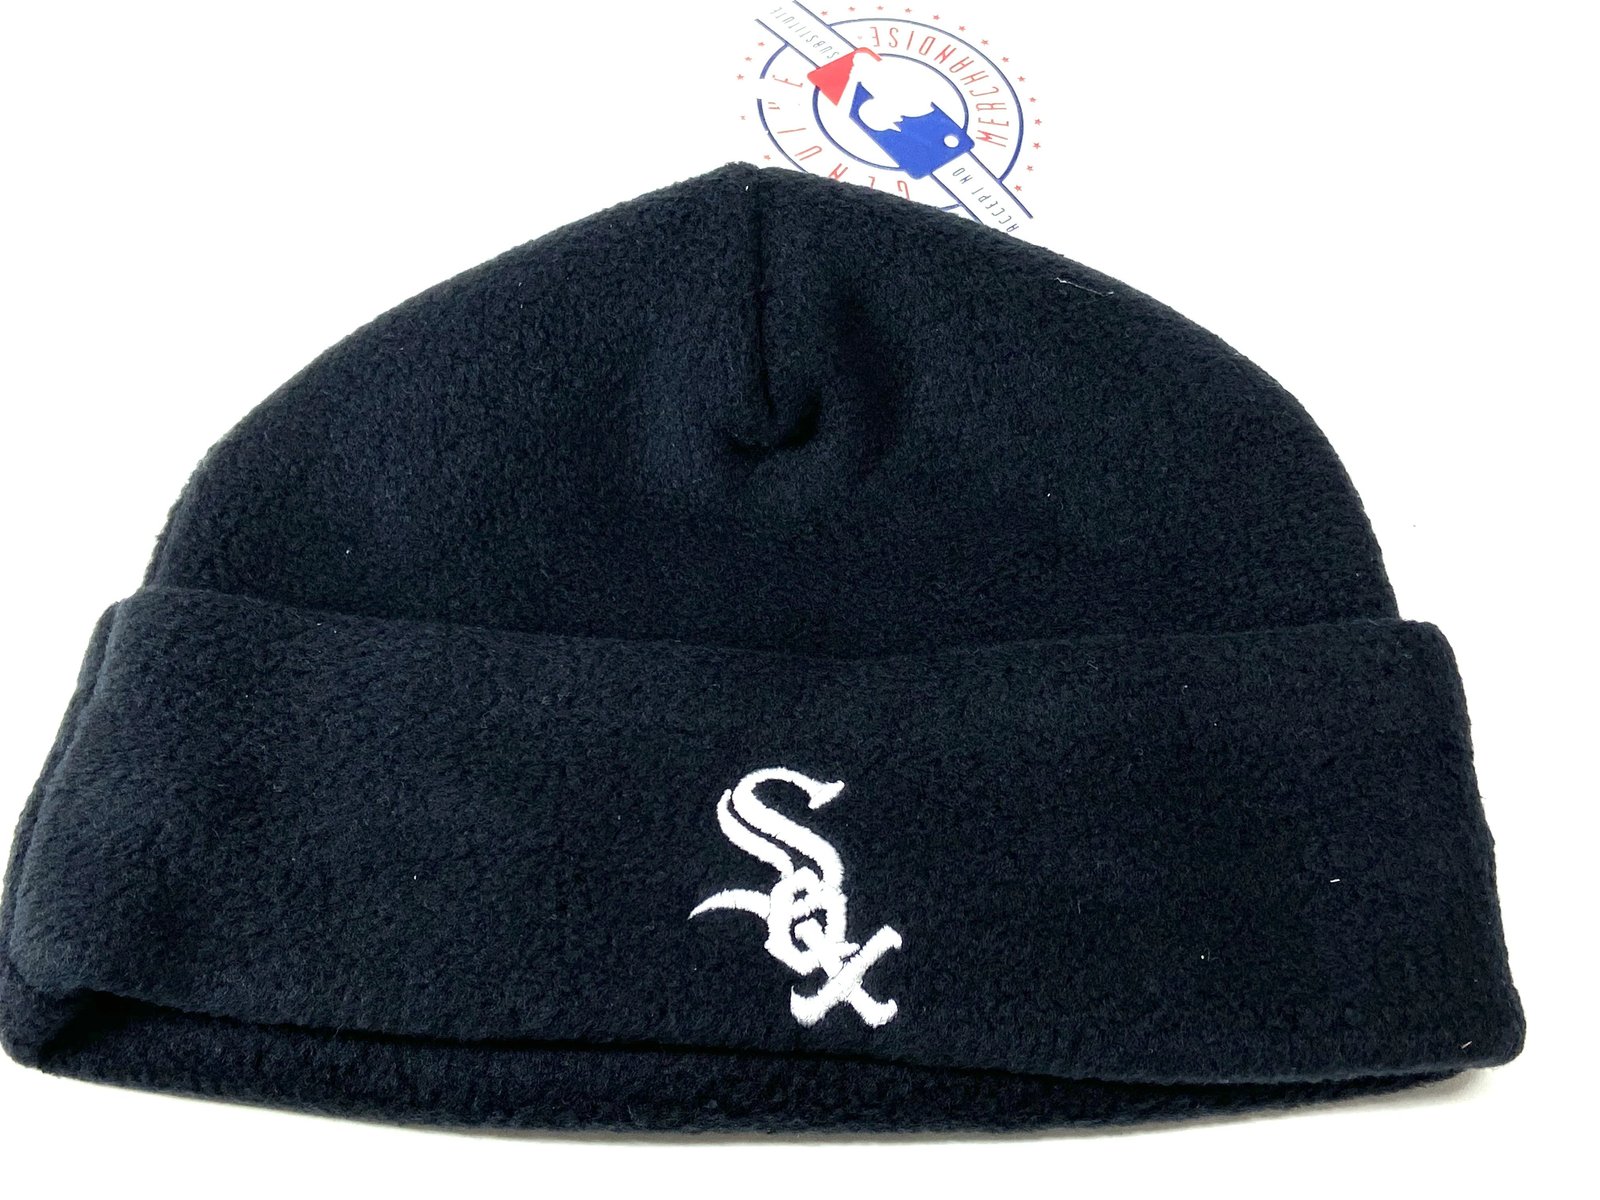 Chicago White Sox Vintage Late '90's MLB Fleece Hat (New) by Drew Pearson Mktg. - $14.99